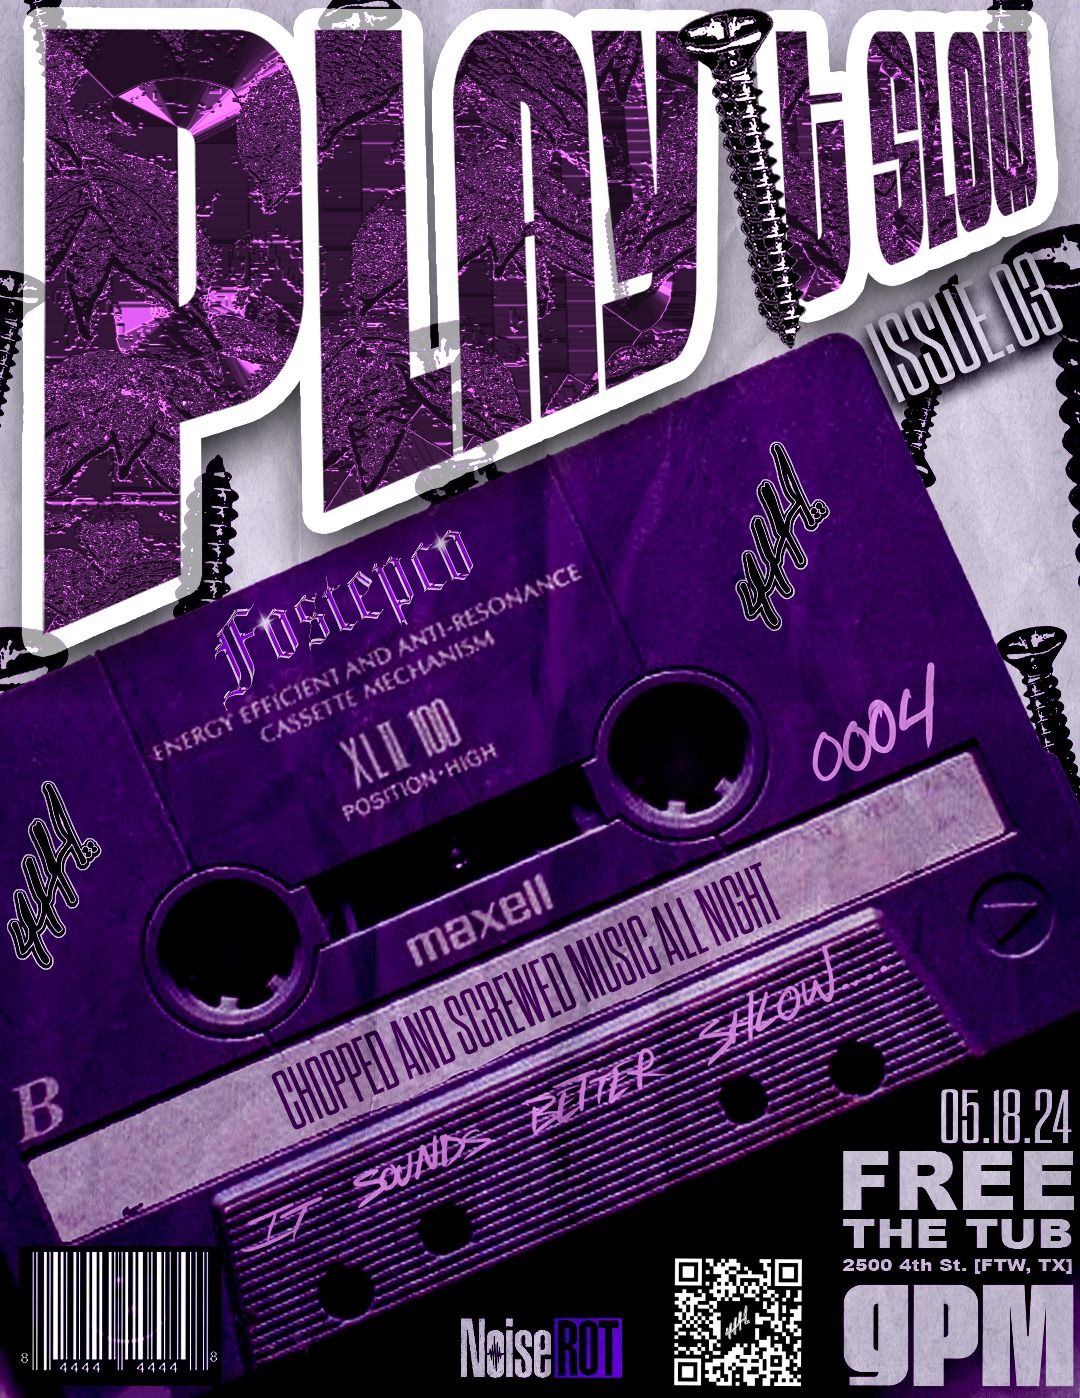 Play It Slow [Issue.03] - A Night 4 Chopped & Screwed Music